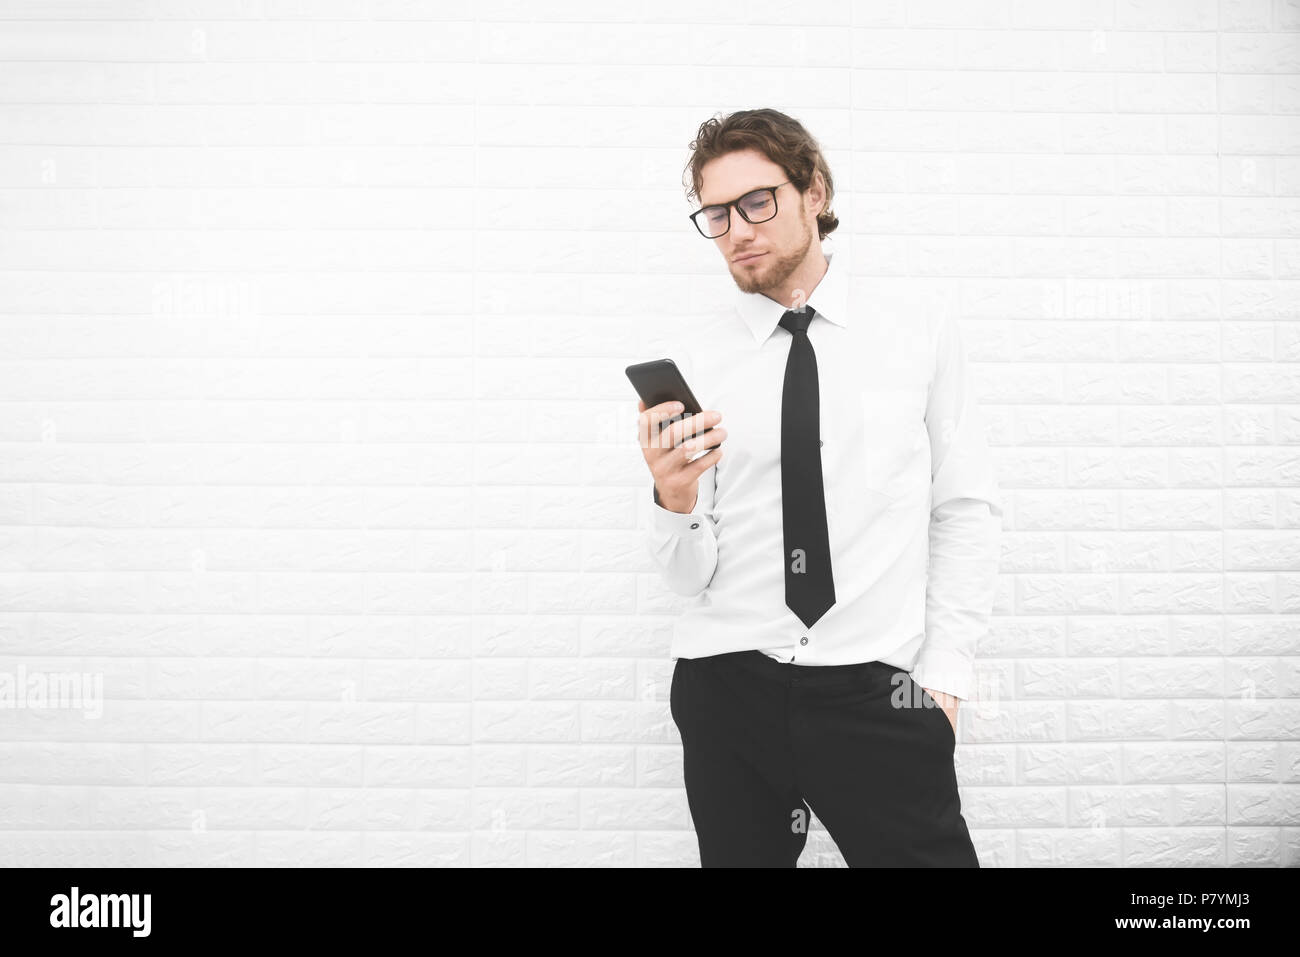 Businessman in formal uniform and using smartphone or mobile phone in front of white wall, Business and fashion concept. Cross processing and Split to Stock Photo